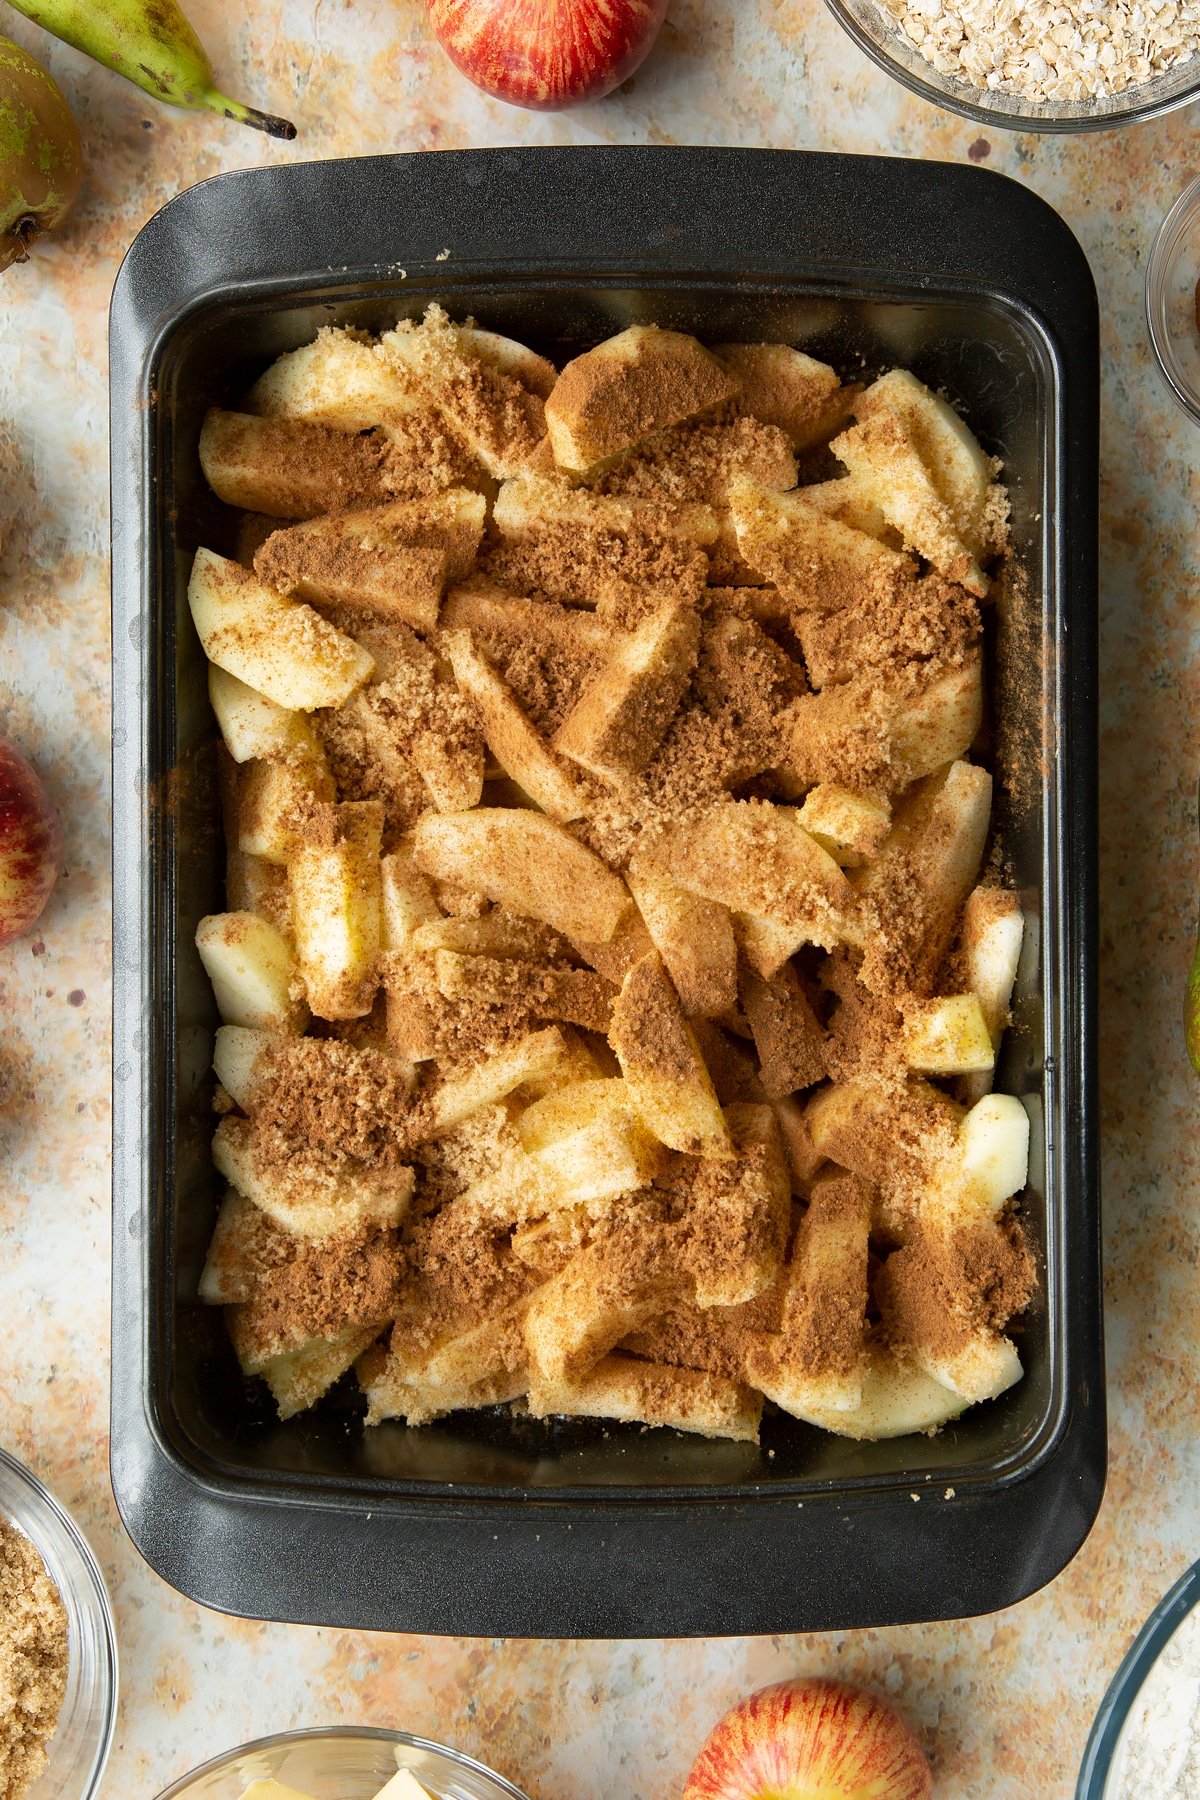 Peeled apple and pear wedges, topped with light brown sugar and cinnamon in a greased tray.